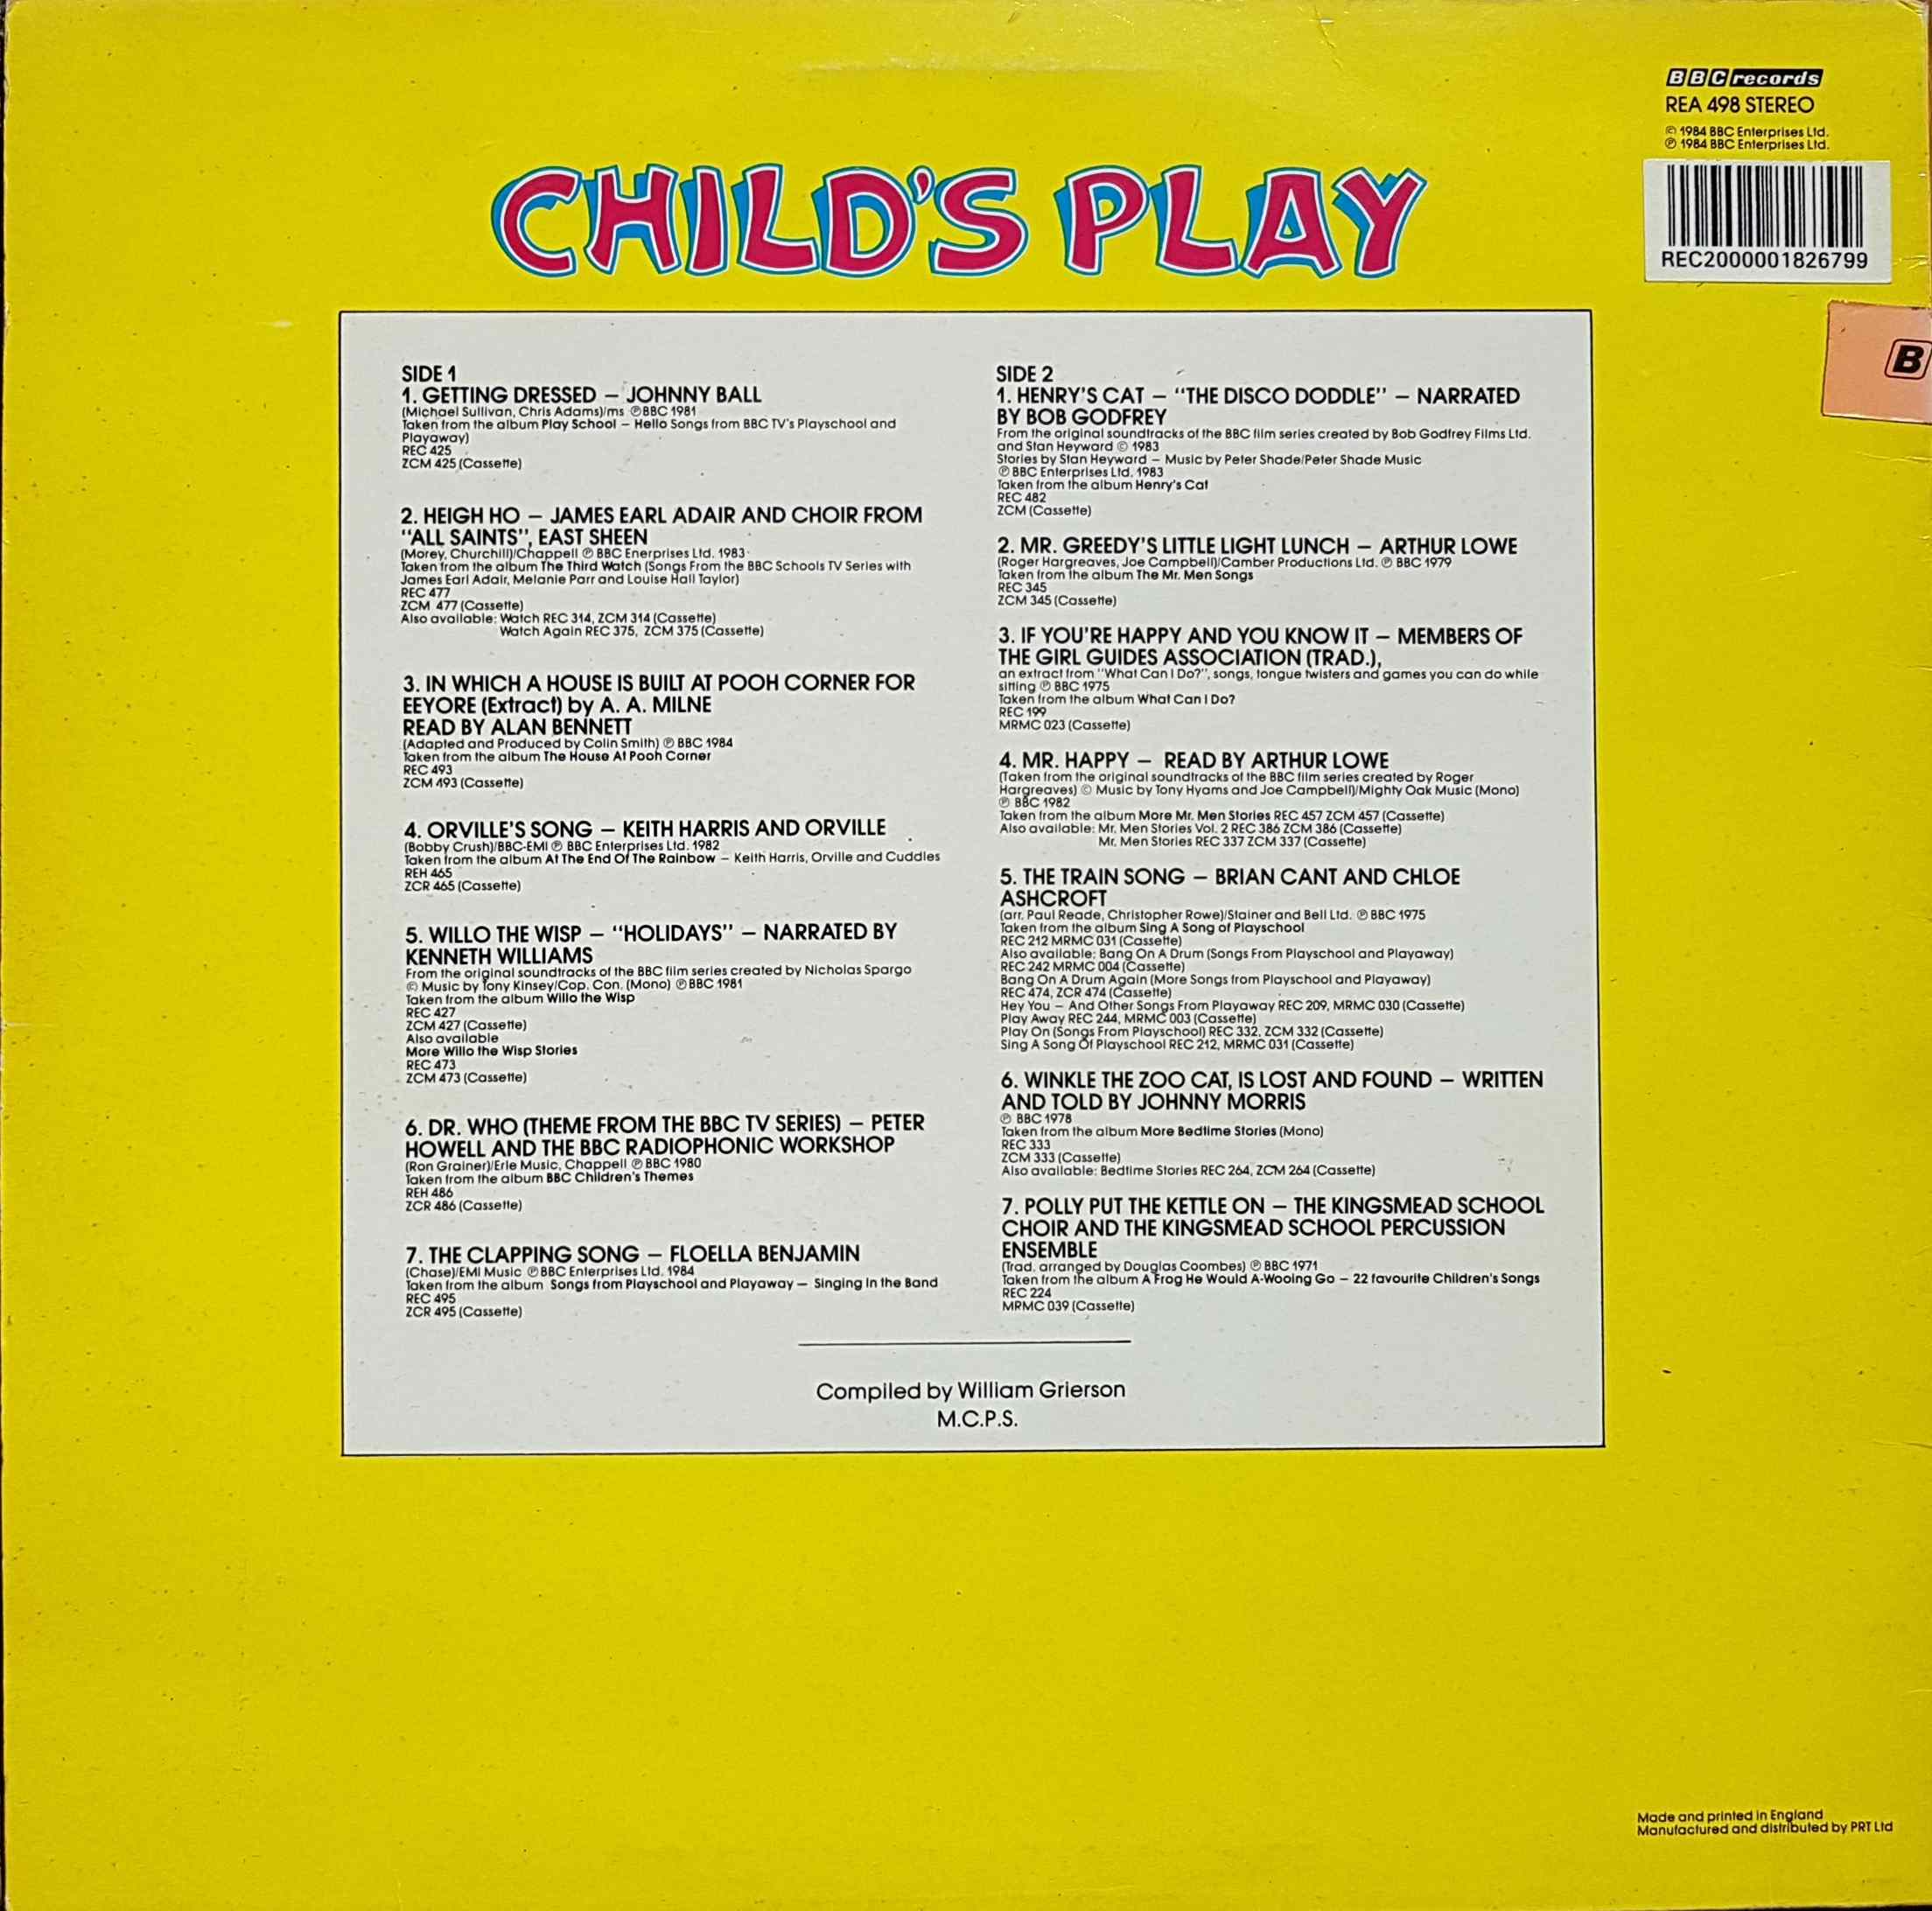 Picture of REA 498 Child's play by artist Various from the BBC records and Tapes library